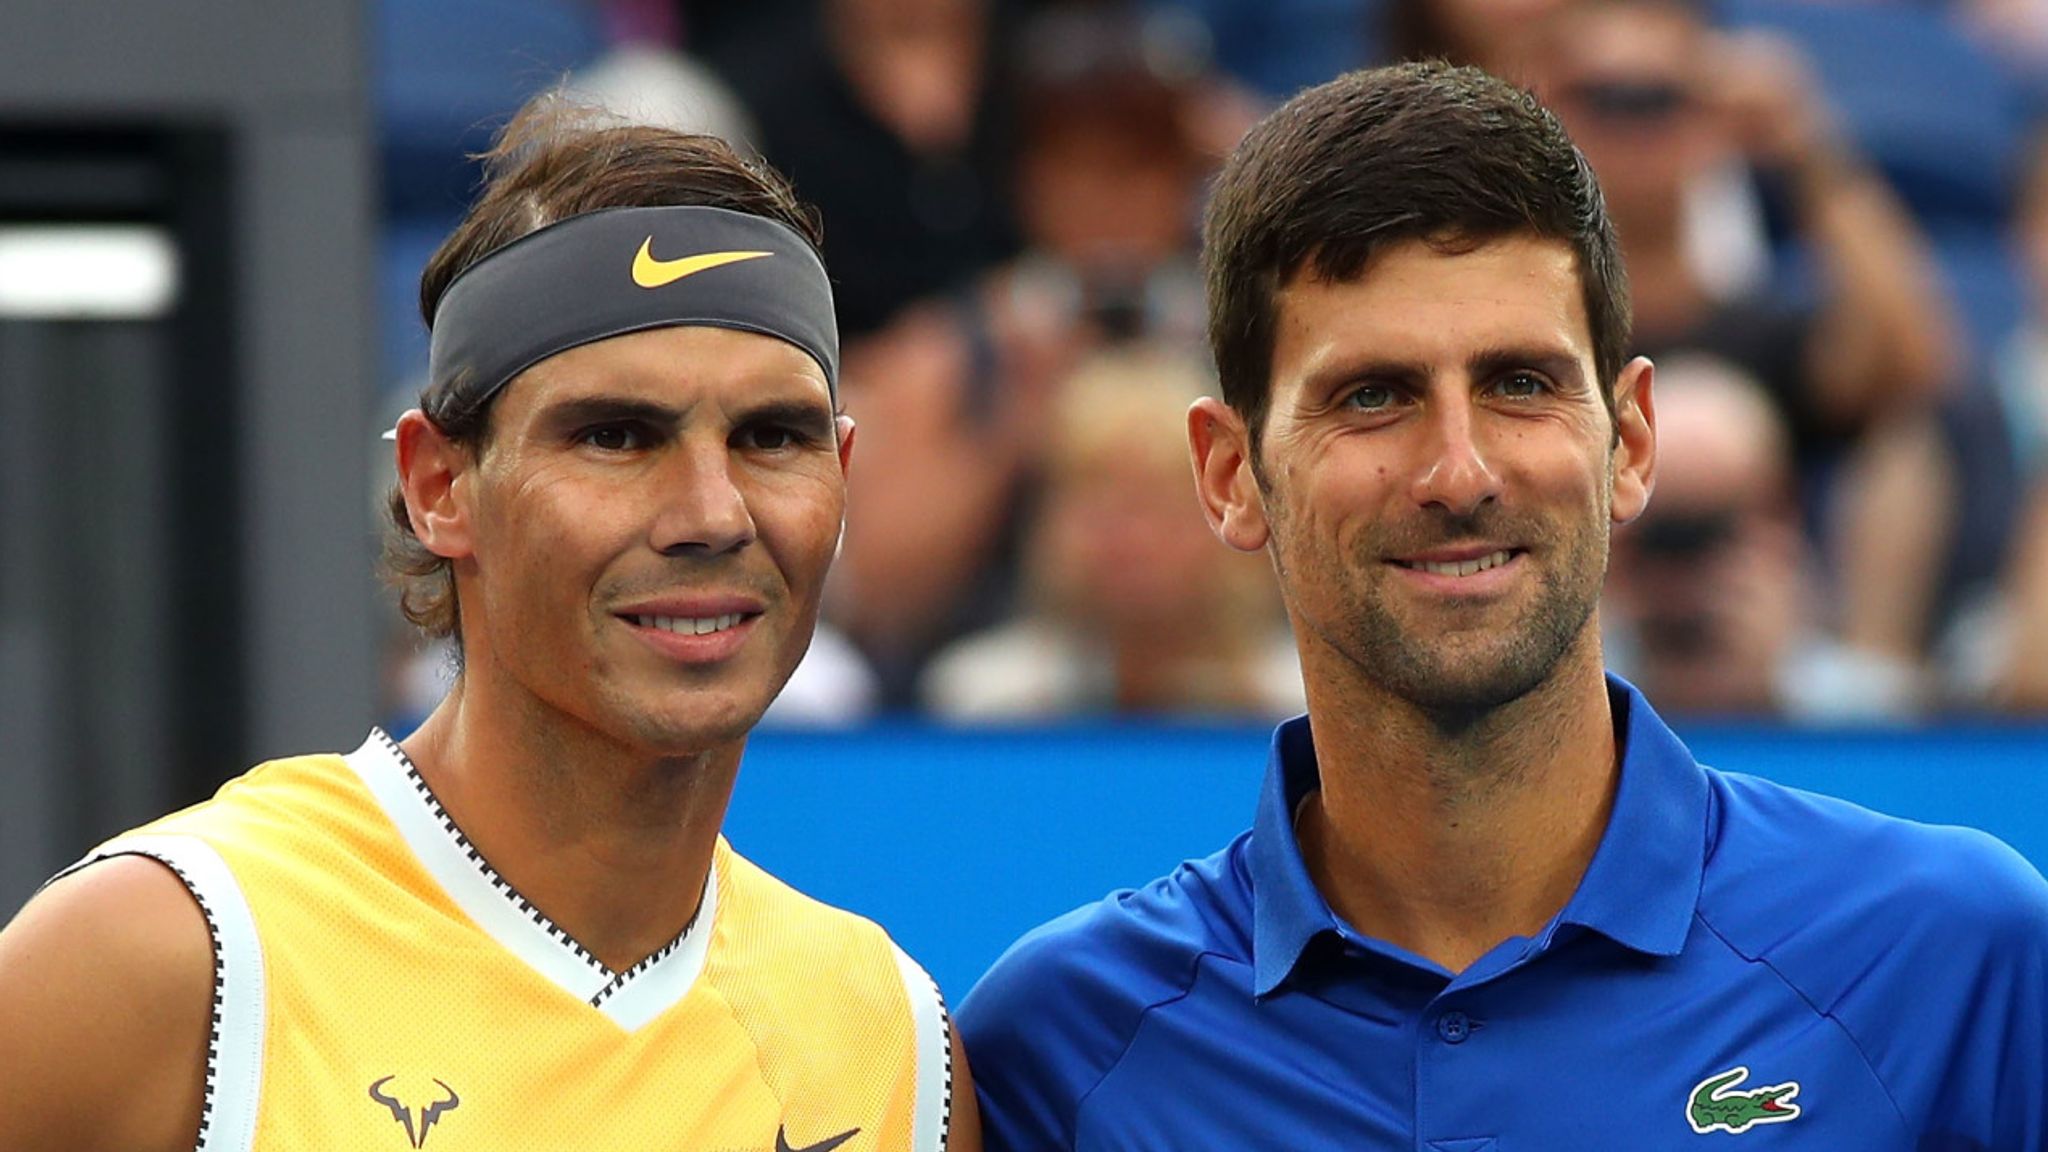 A Big Question: What’s next for Novak and Nadal? Four ATP storylines after the Paris fortnight